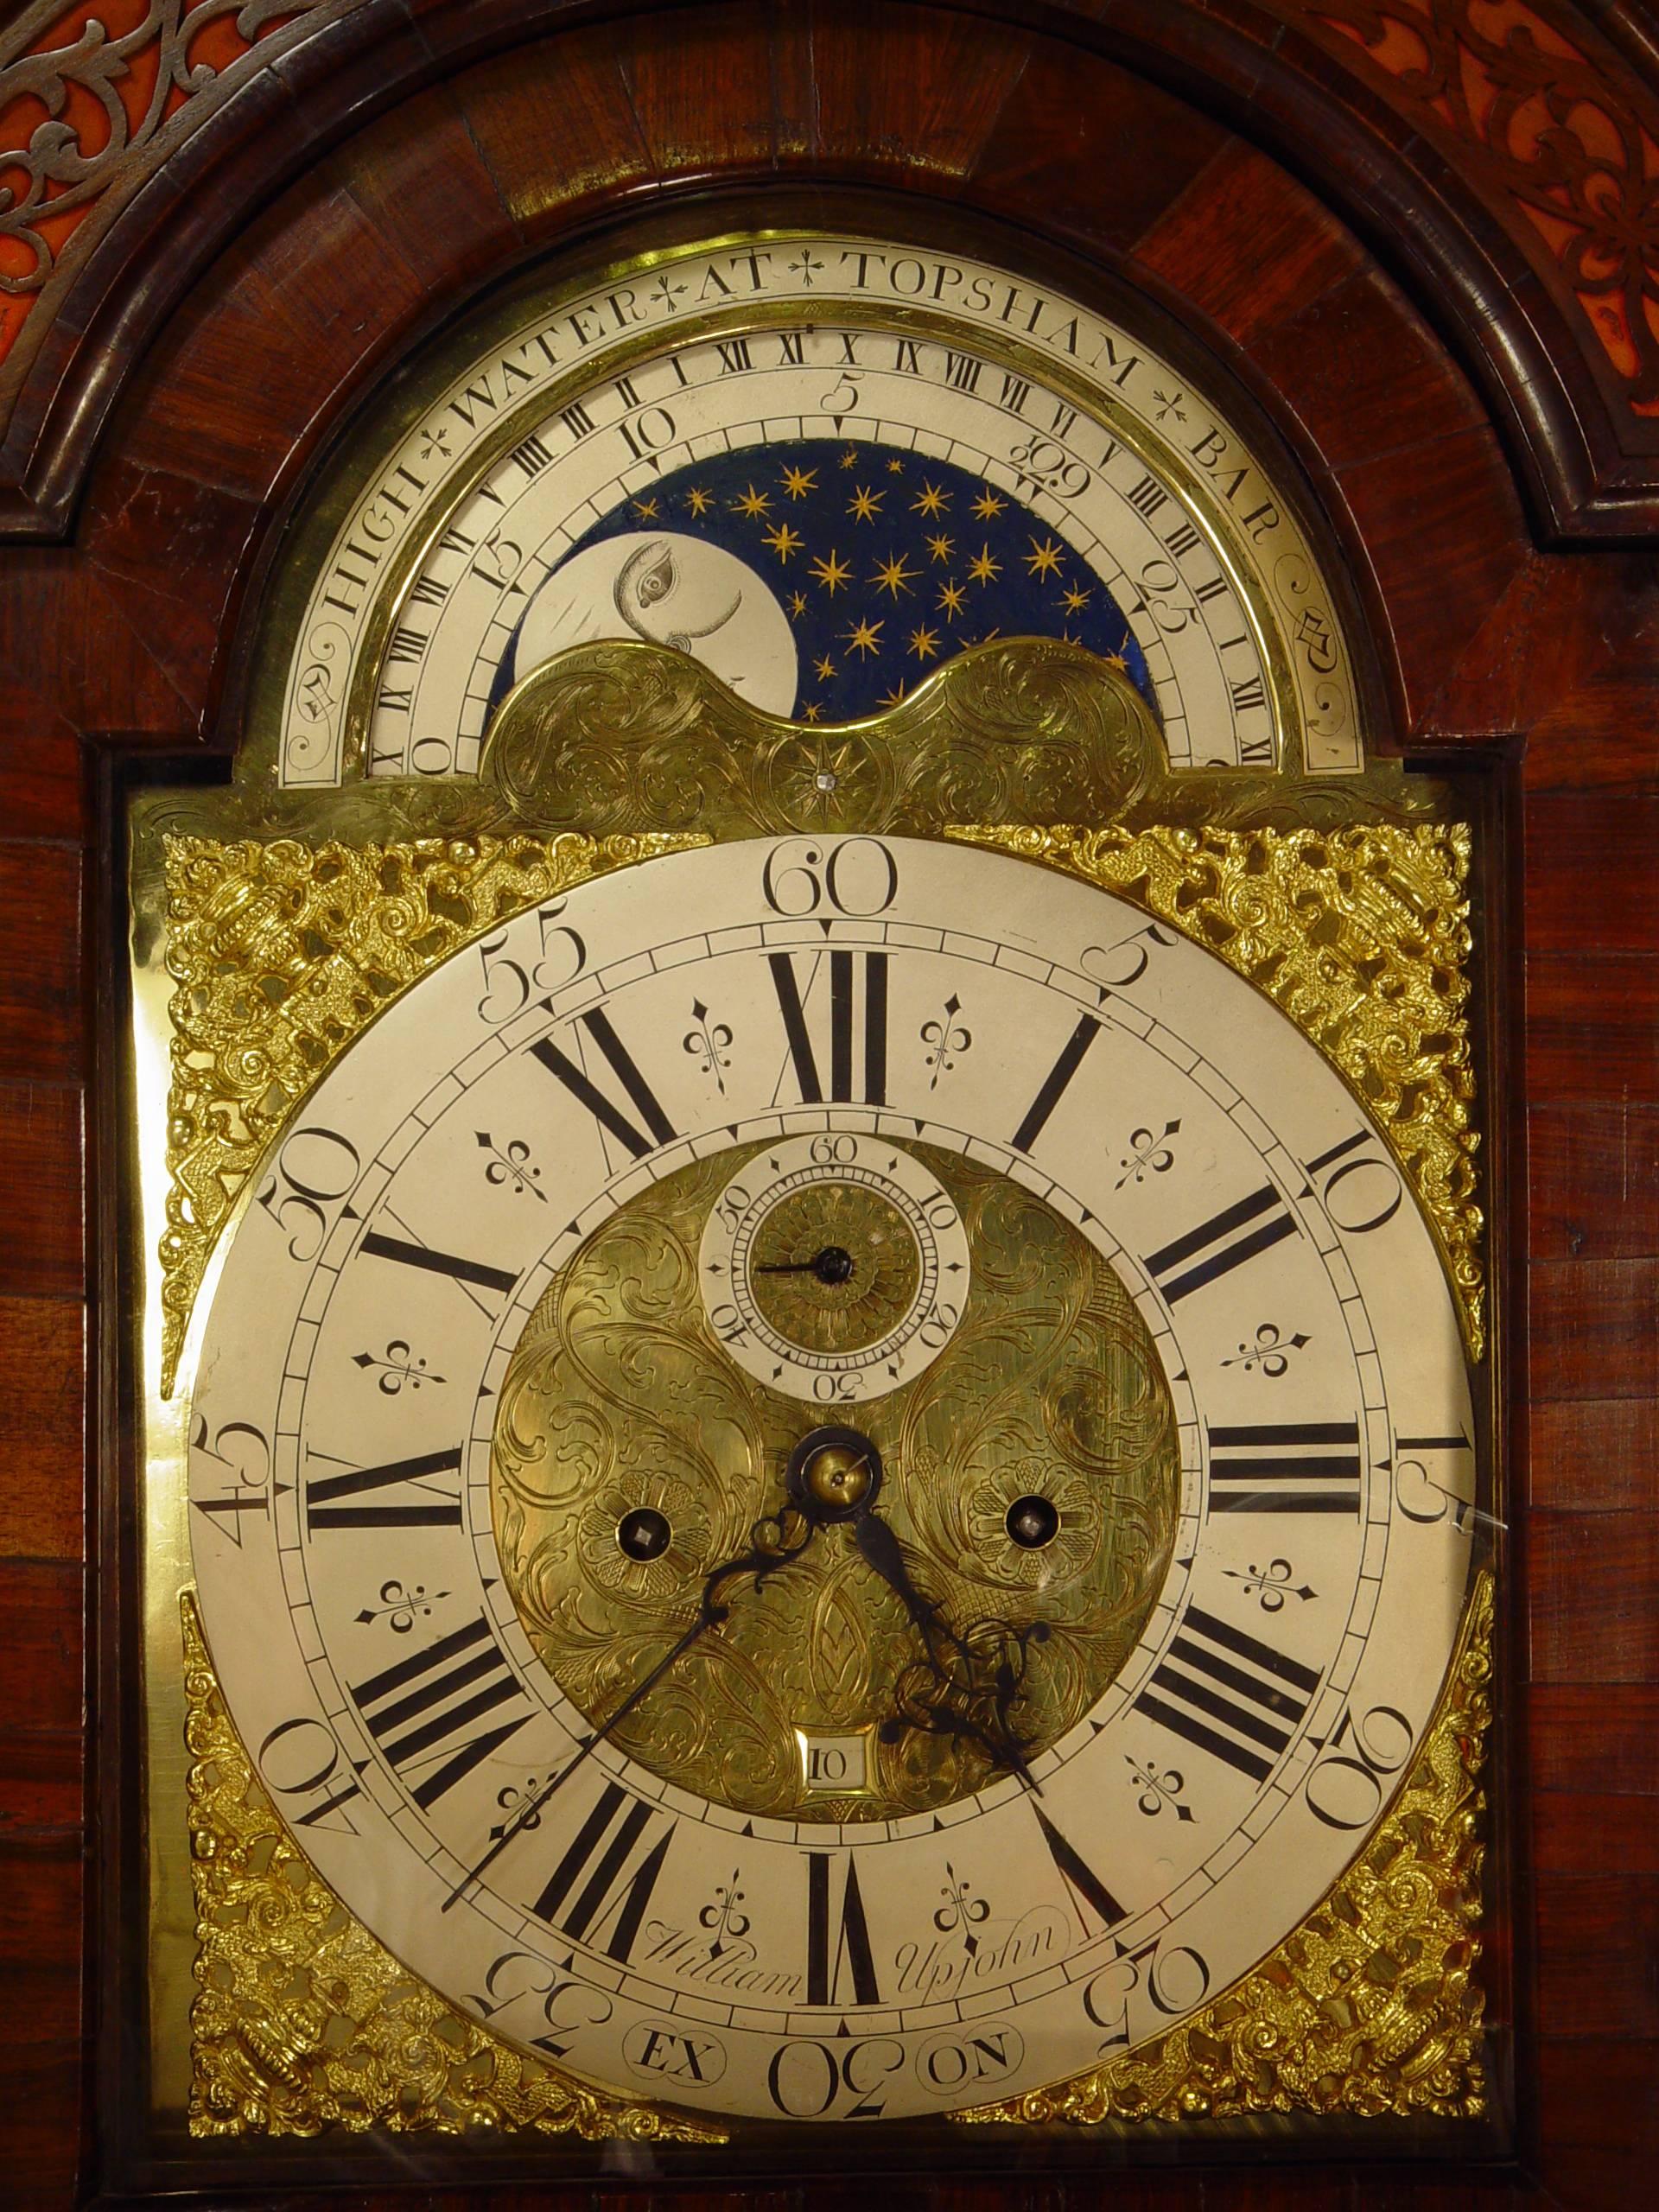 A good and attractive English walnut longcase clock with moon phase by William Upjohn, circa 1730.
arched brass dial with silvered engraved chapter ring signed William Upjohn Exon, blued hands and finely pierced gilt mask spandrels, foliate